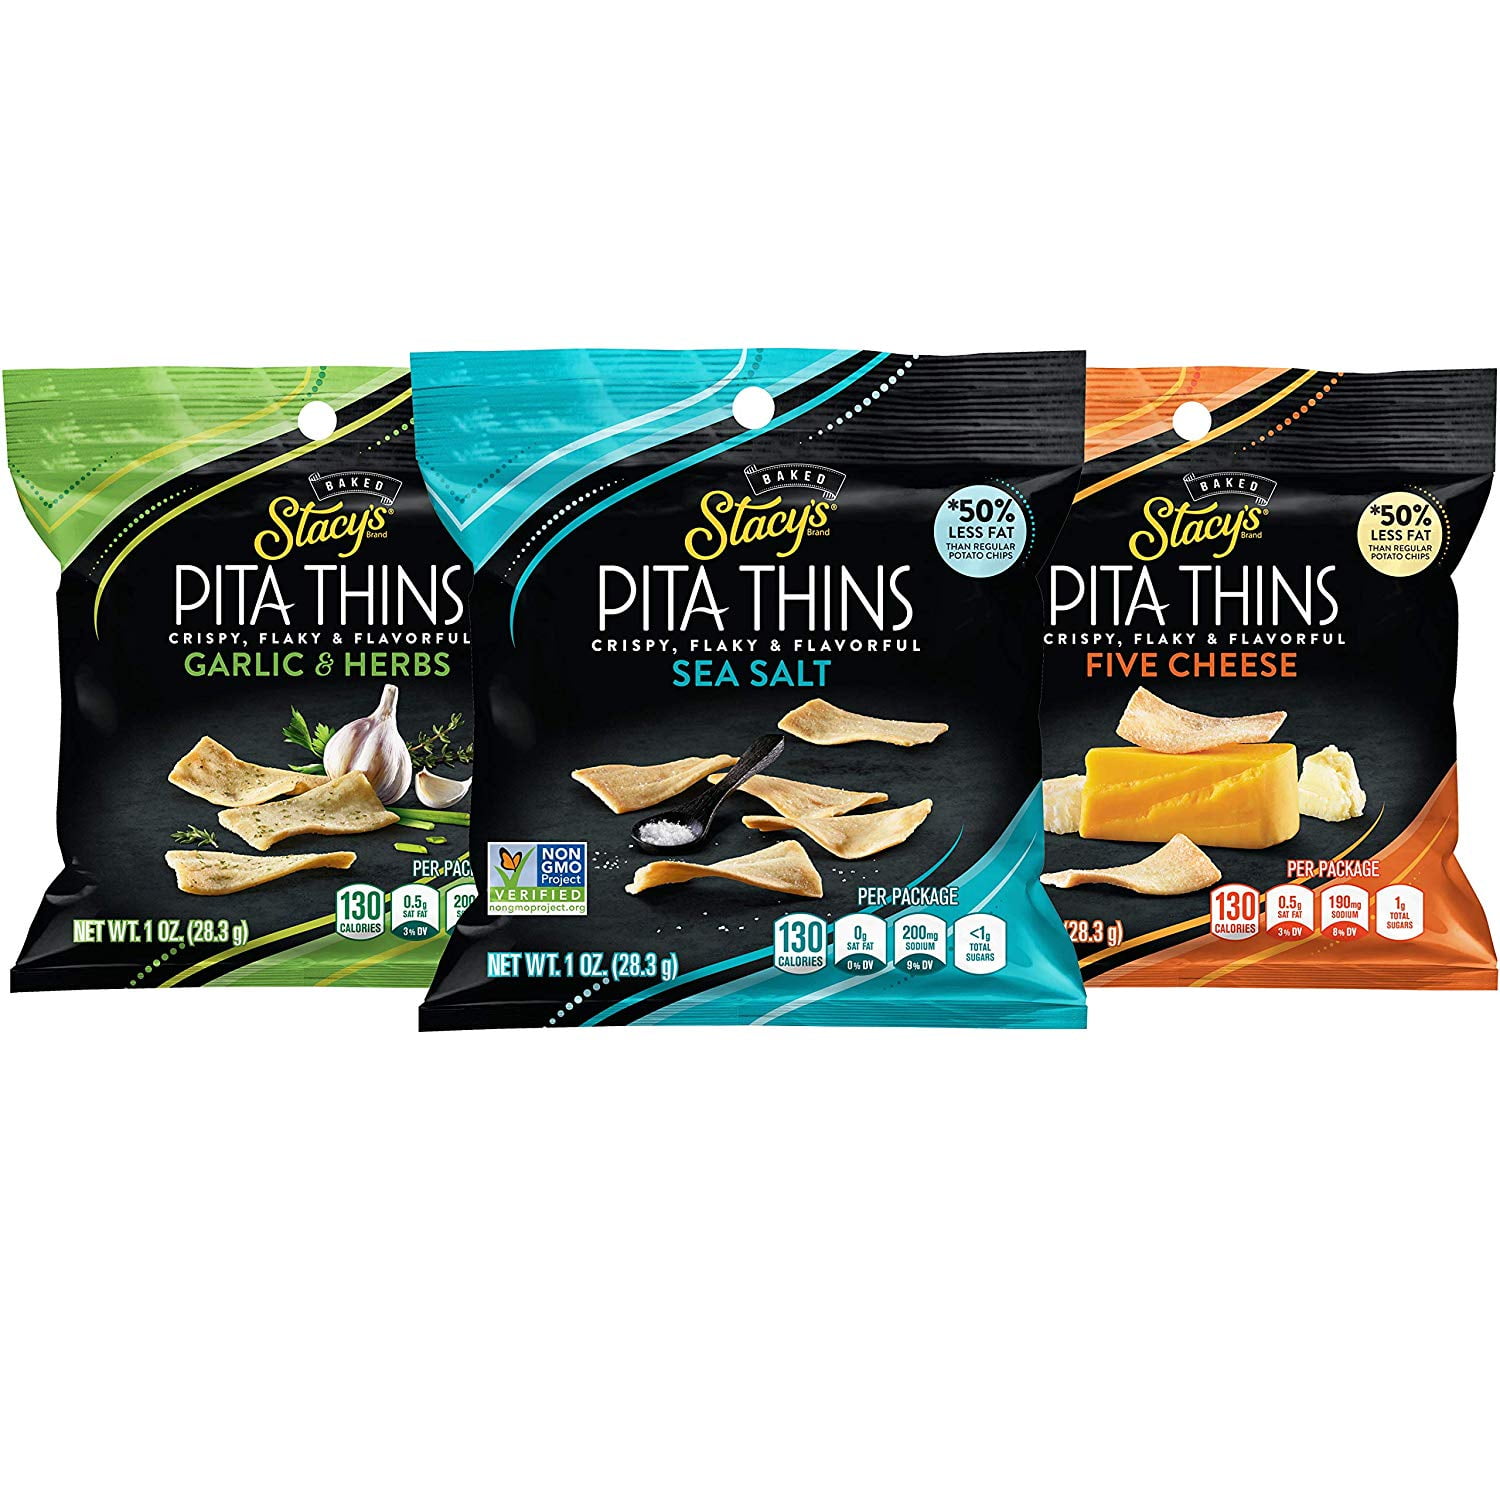 Photo 1 of  Stacy's Pita Thins, 3 Flavor Variety Pack, 1 oz Bags, 24 Count
EXP APR 9 2024 